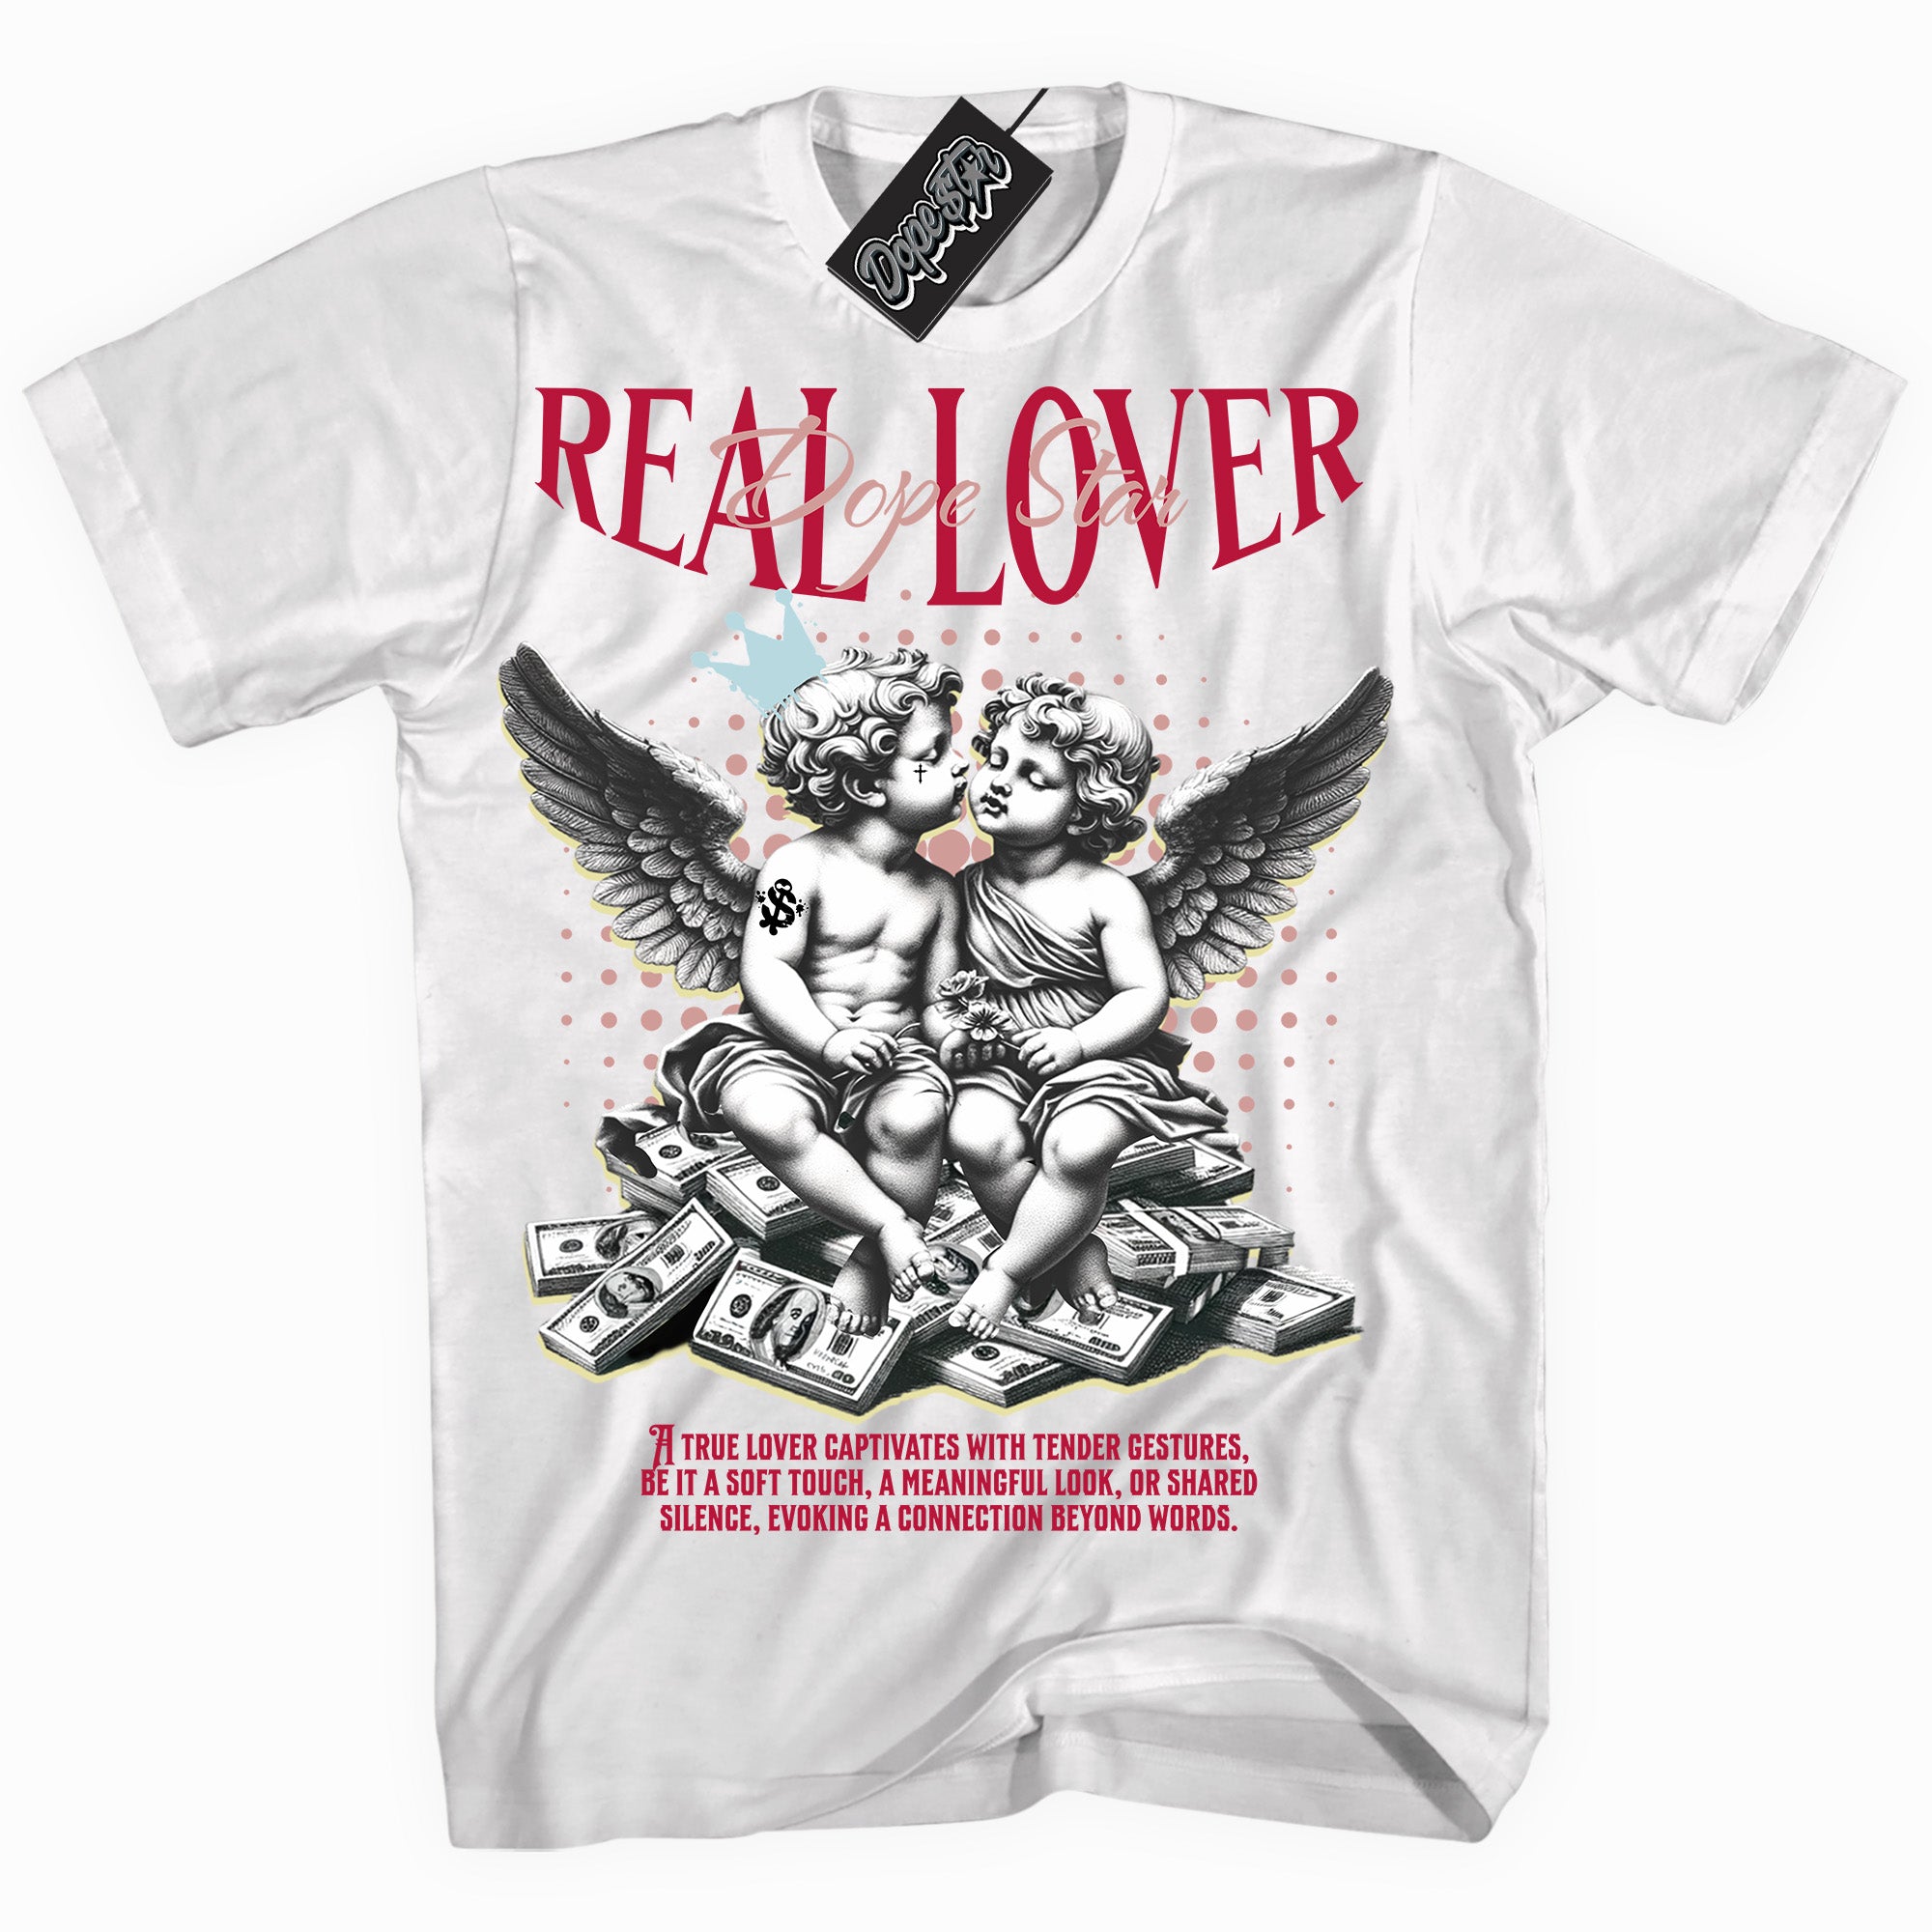 Cool White Shirt With Real Lover design That Perfectly Matches SPIDER VERSE 1S Sneakers.